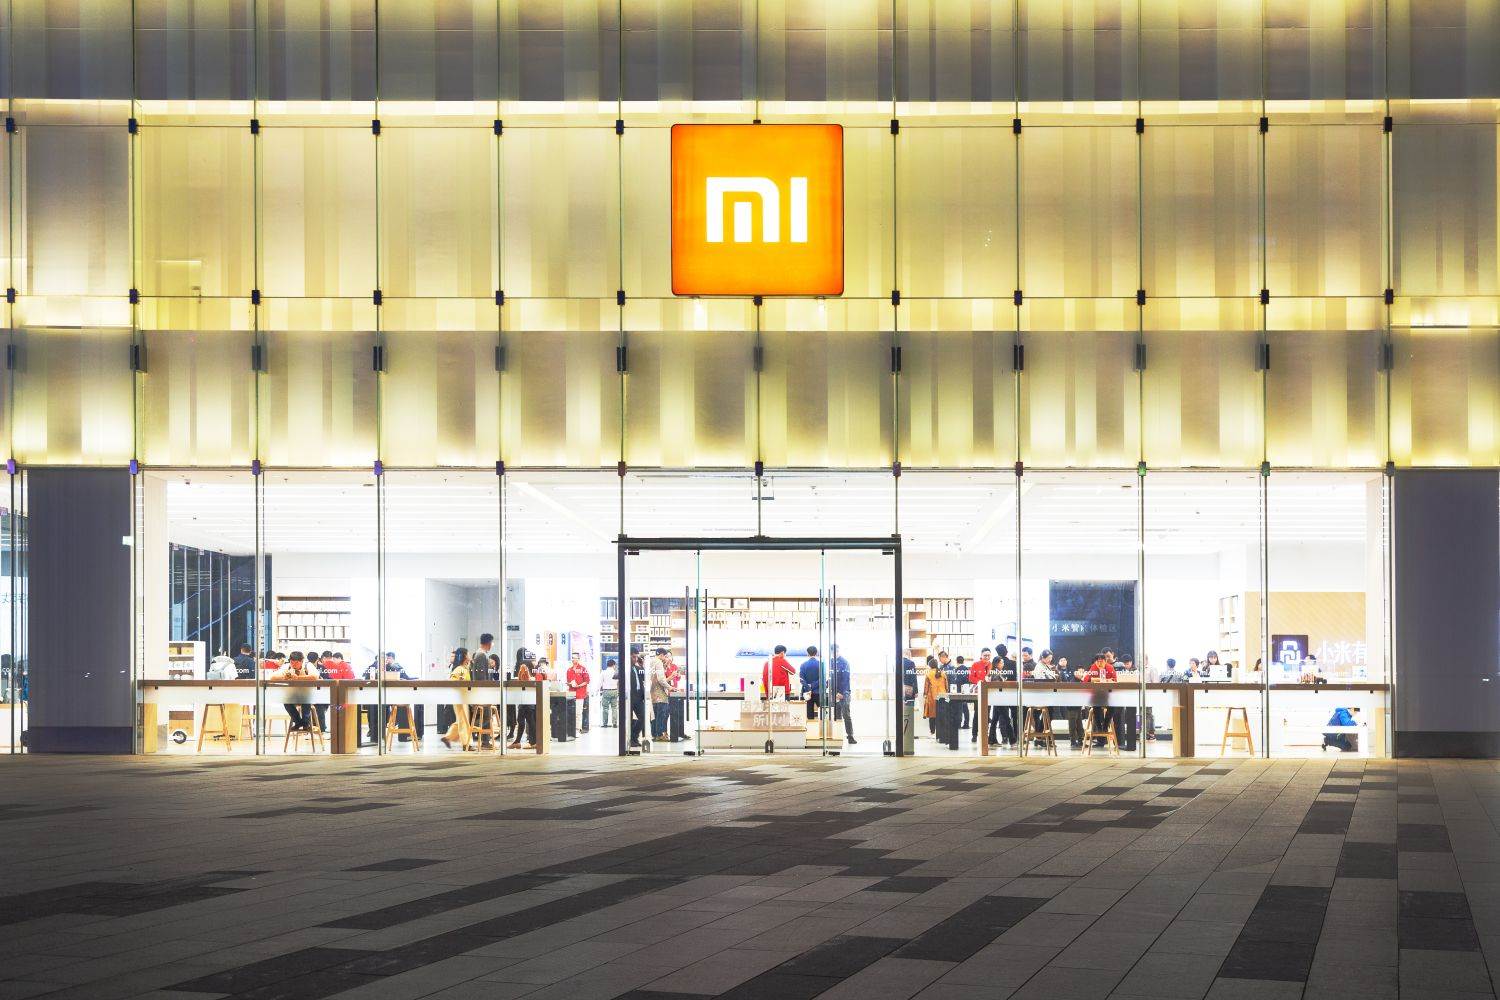  xiaomi,commercial,electronics,shop,smartphone,icon,sign,global,o 